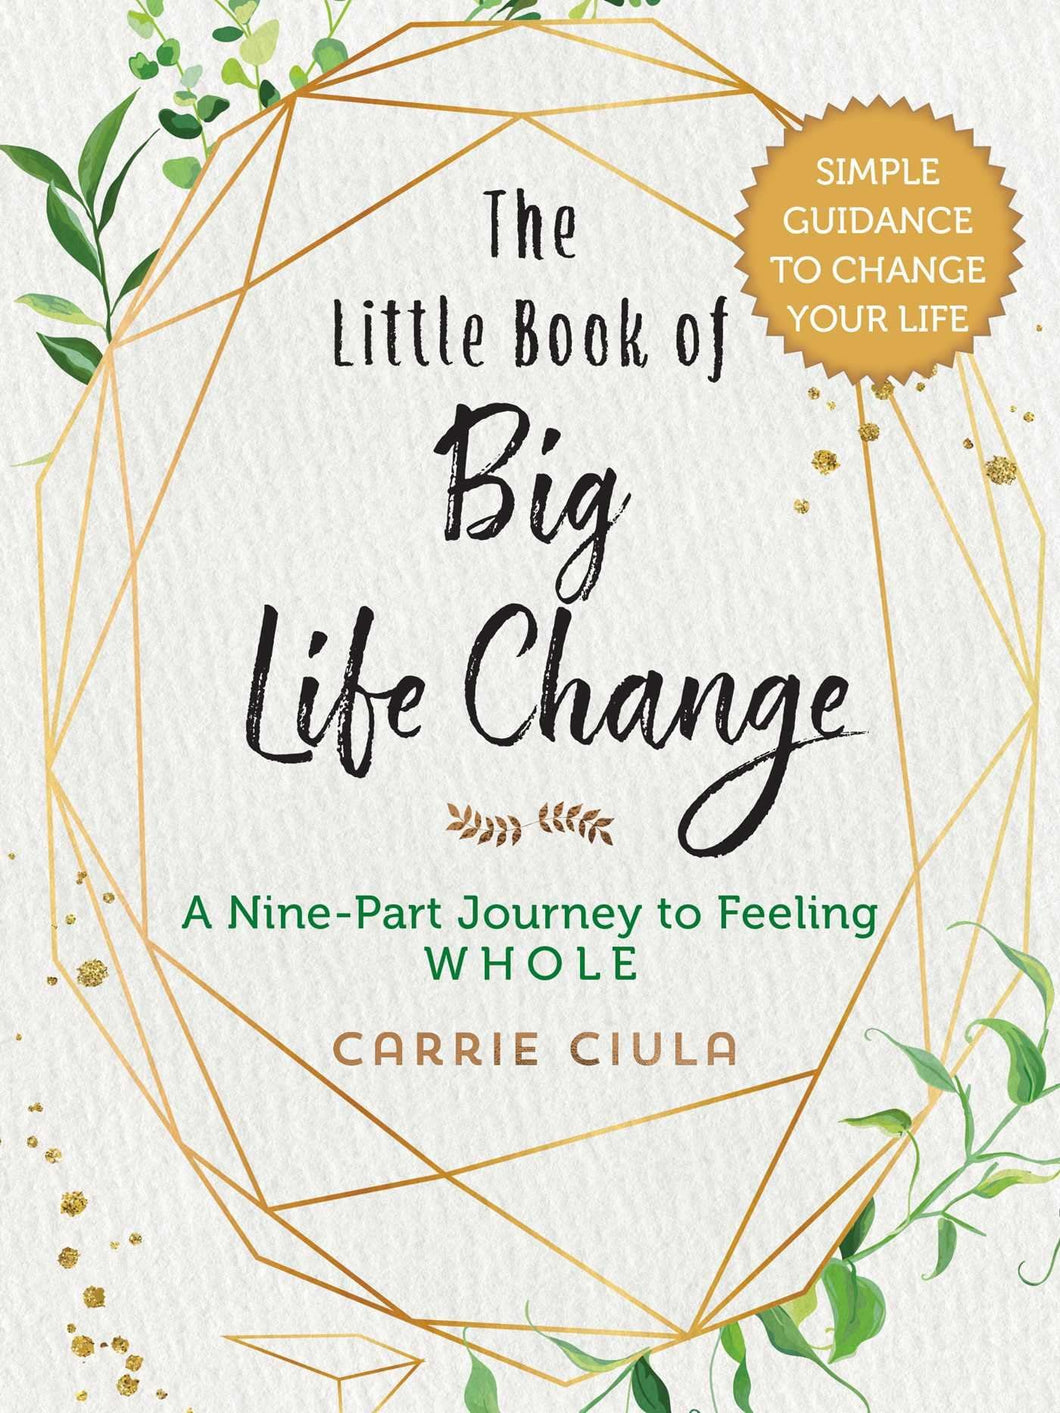 The Little Book of Big Life Change: A Nine-Part Journey to Feeling Whole